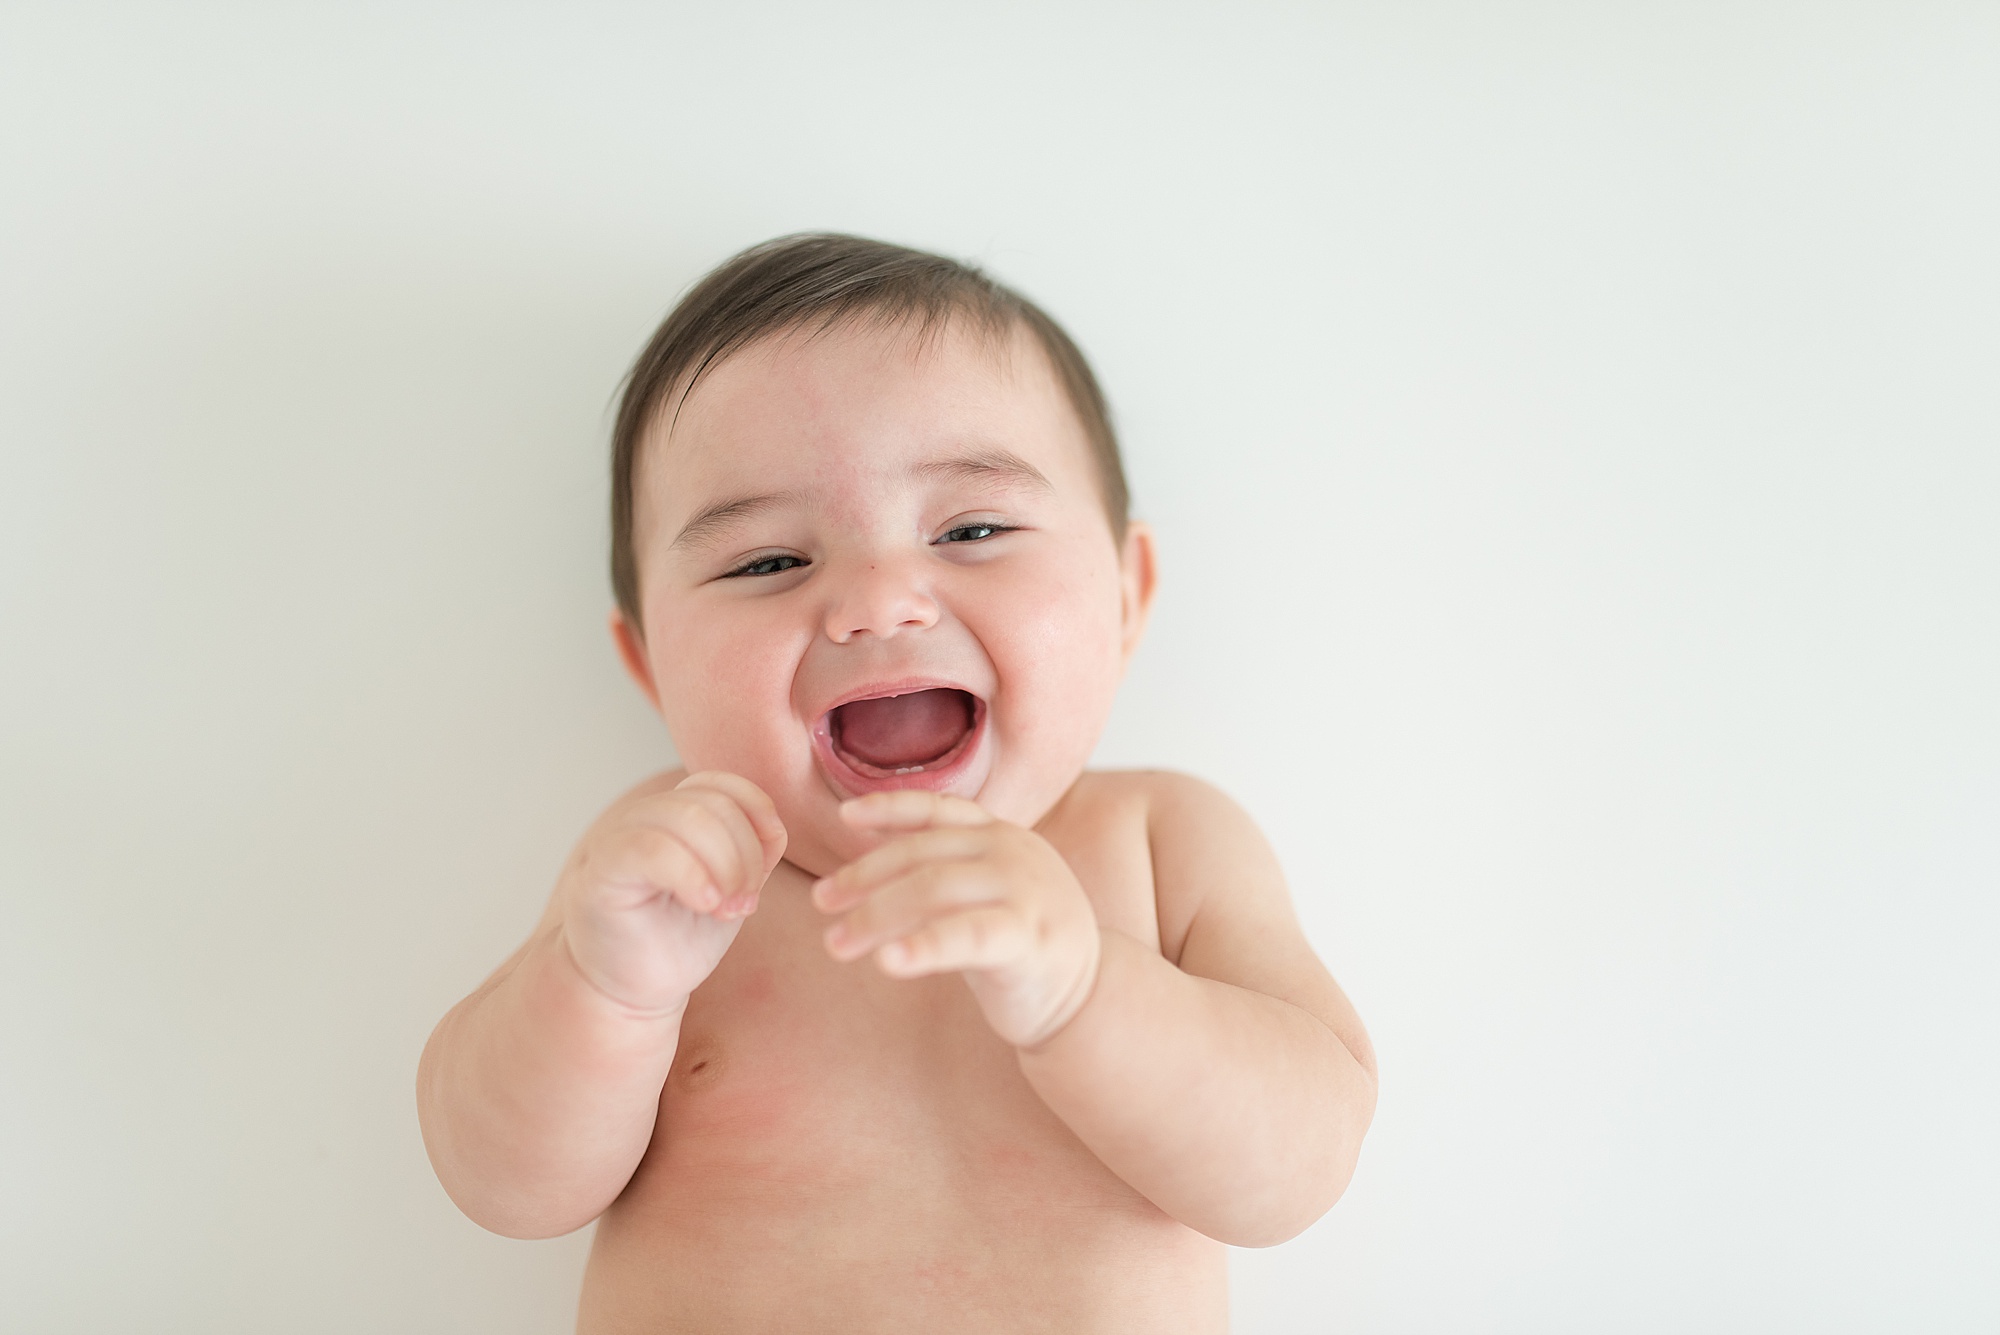 6 Month old baby giggles during newborn Milestone Session by Lindsey Dutton Photography